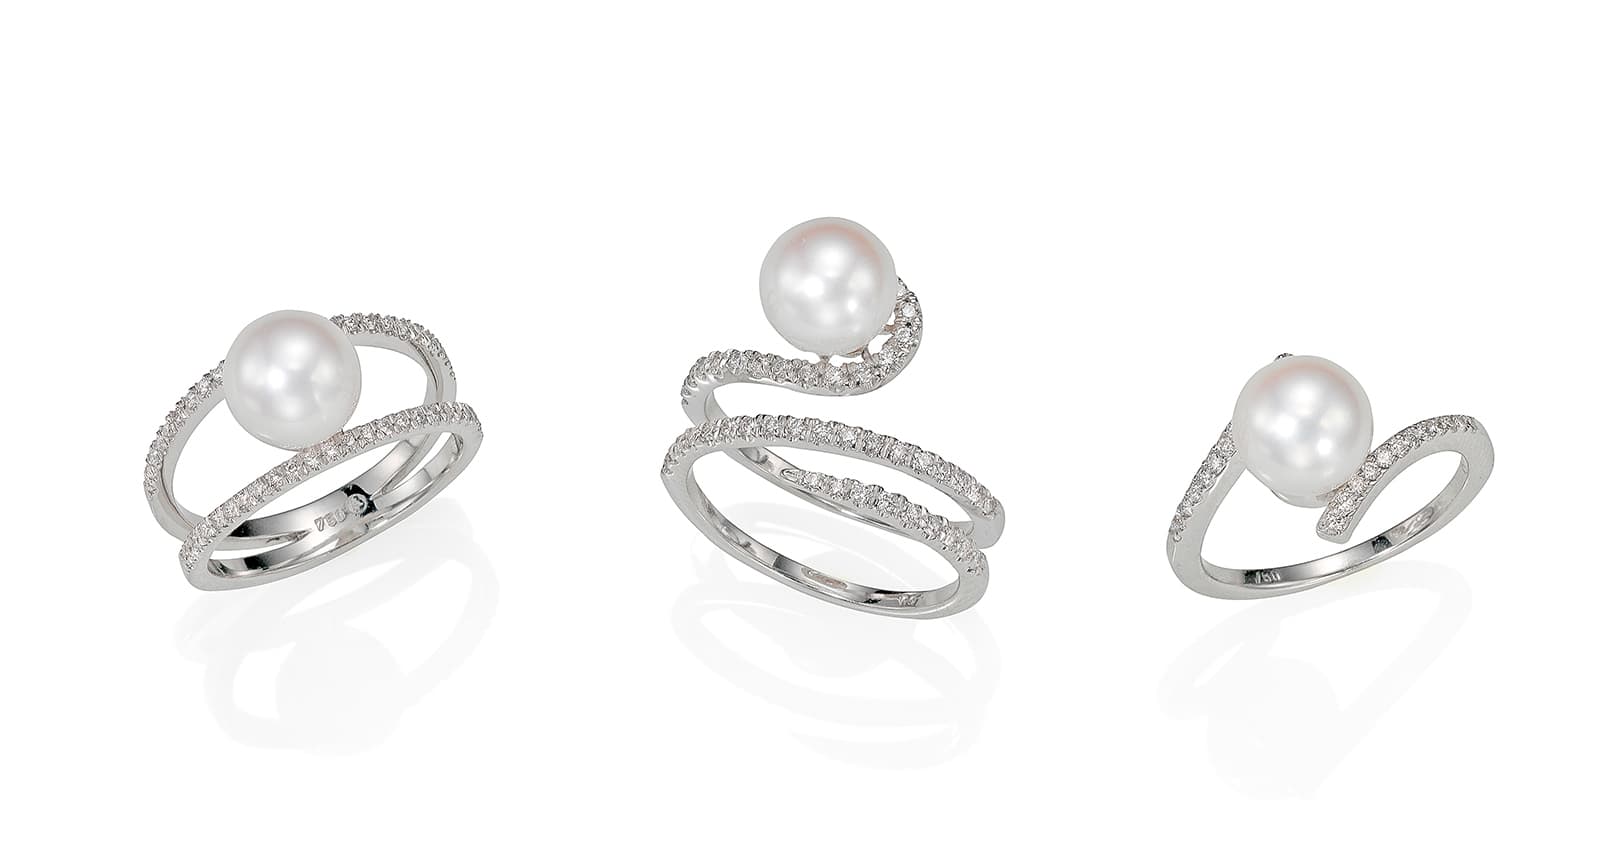 Assael Akoya pearl rings in white gold with diamonds